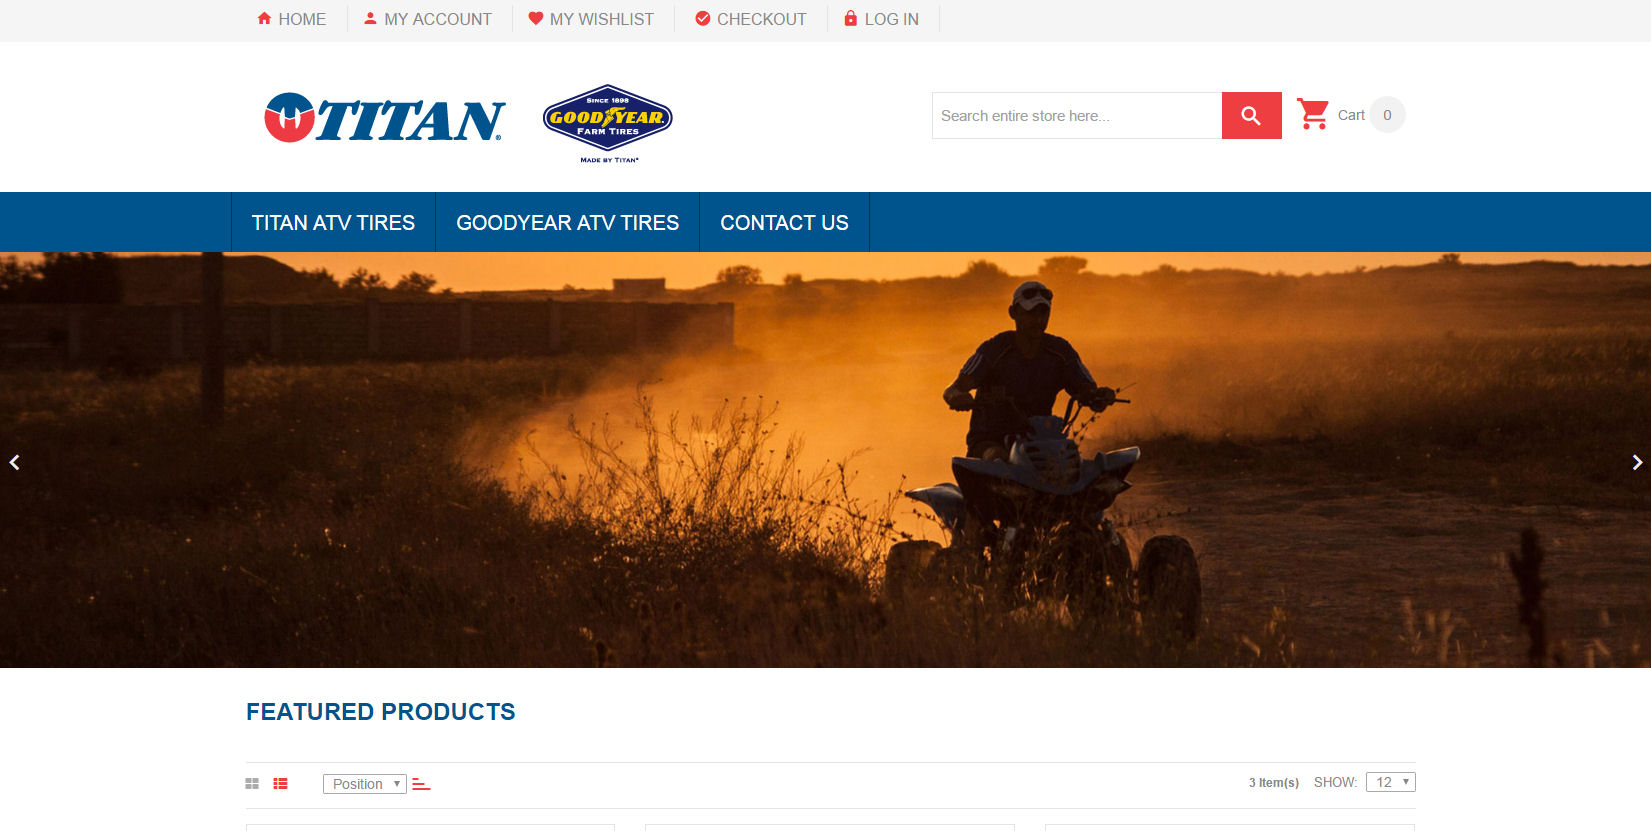 Titan, Goodyear e-commerce site goes live in USA